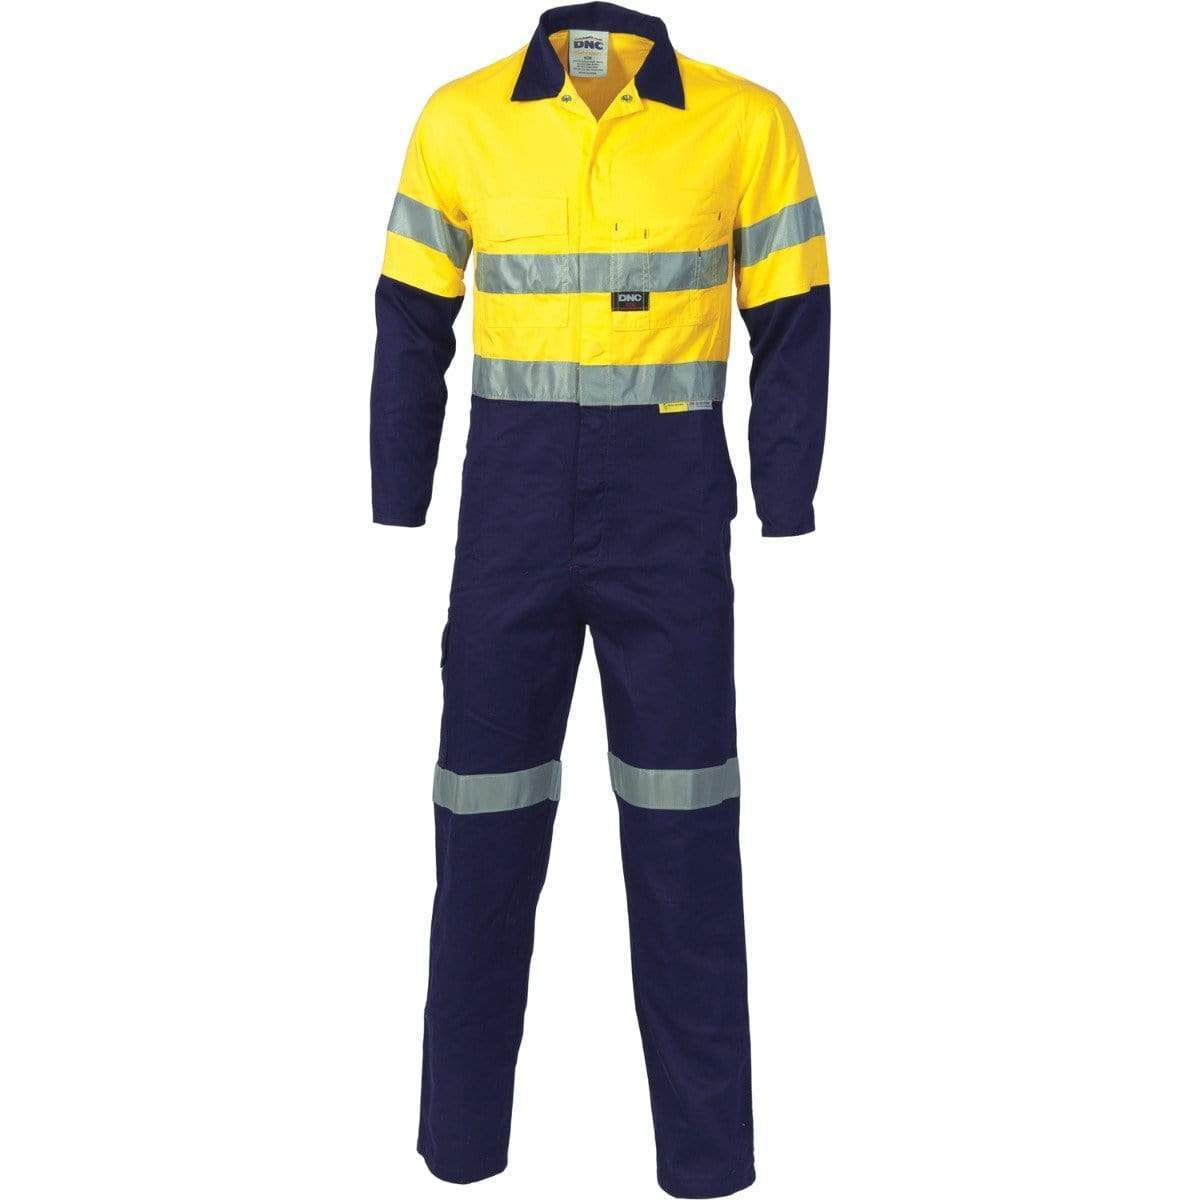 Dnc Workwear Hi-vis Two-tone Cotton Coverall With 3m Reflective Tape - 3855 Work Wear DNC Workwear Yellow/Navy 77R 